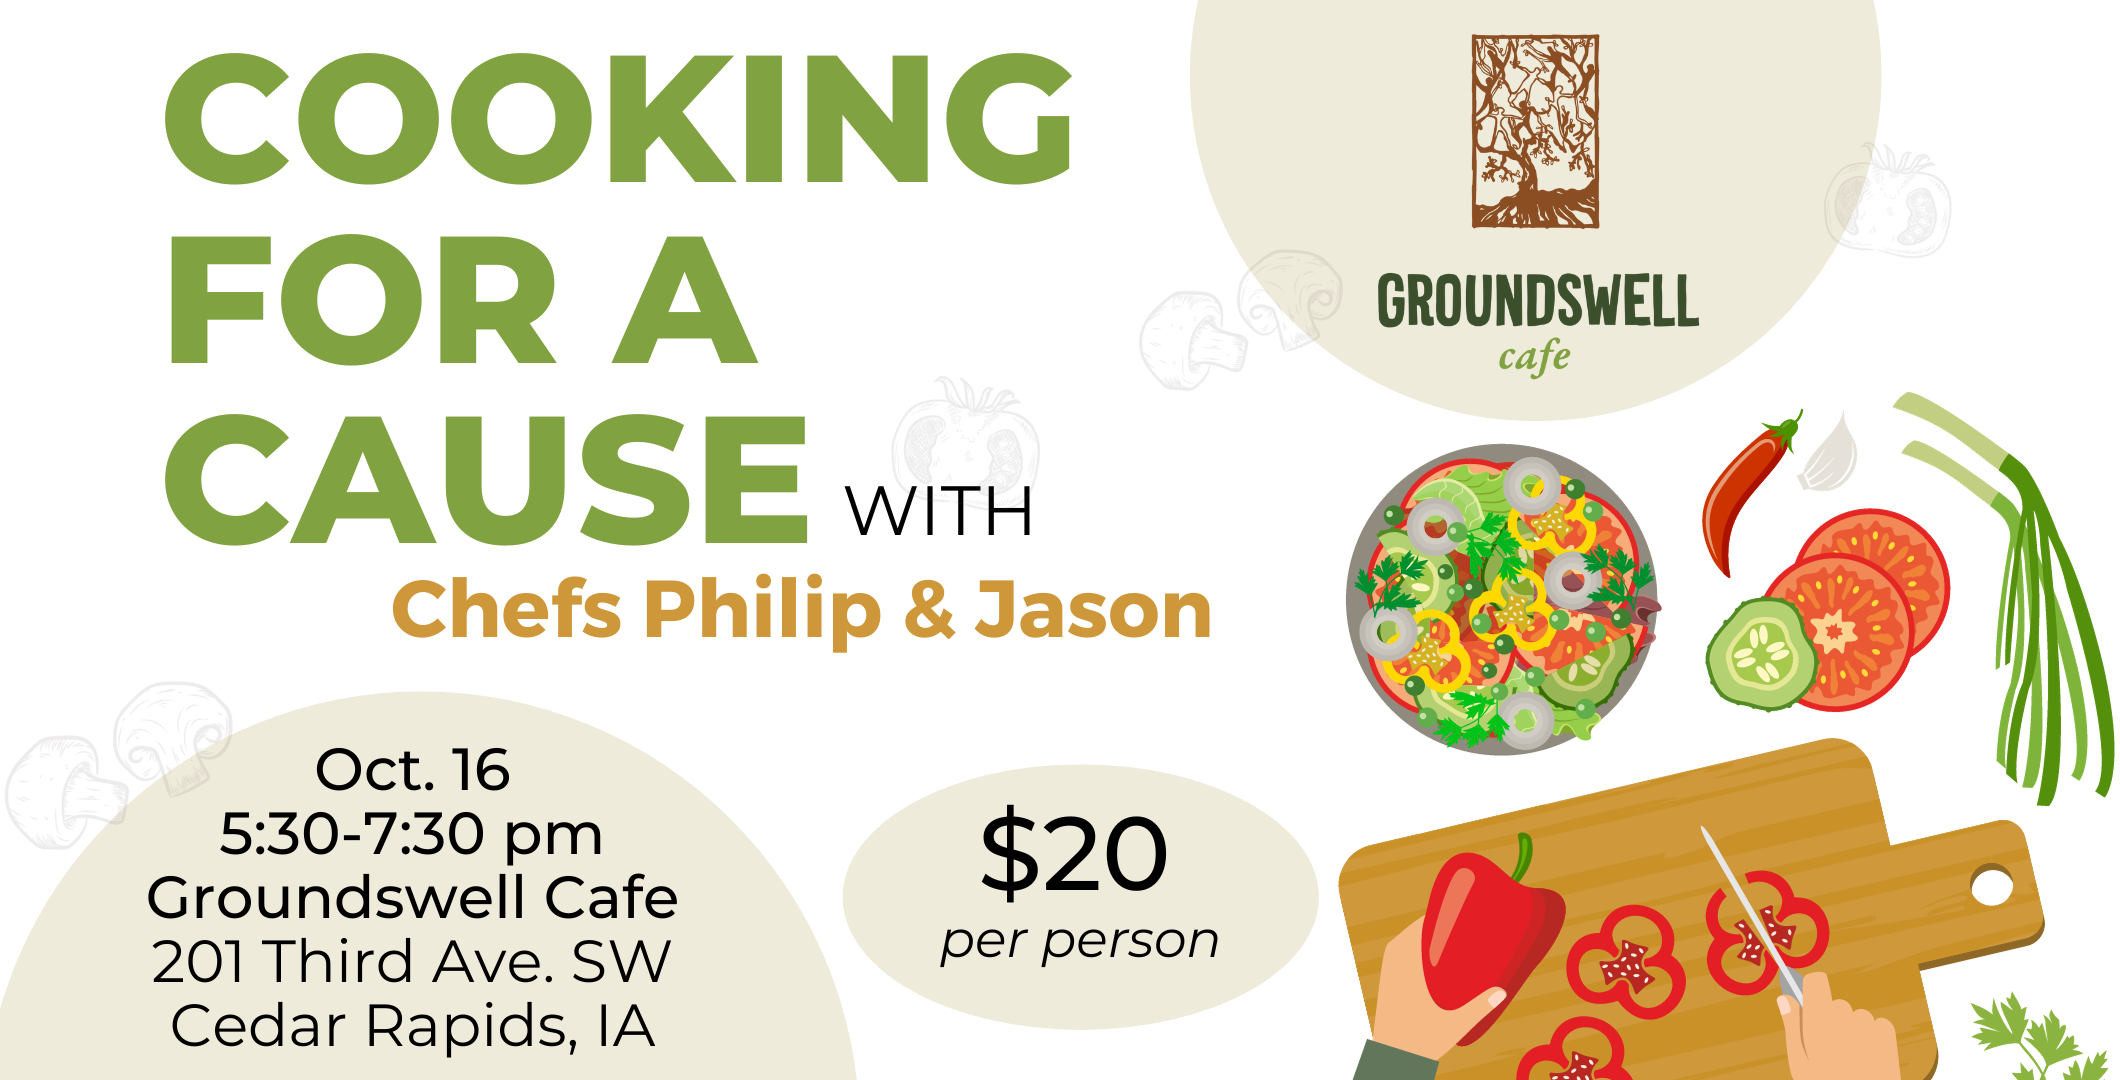 Cooking for a Cause – Oct 16